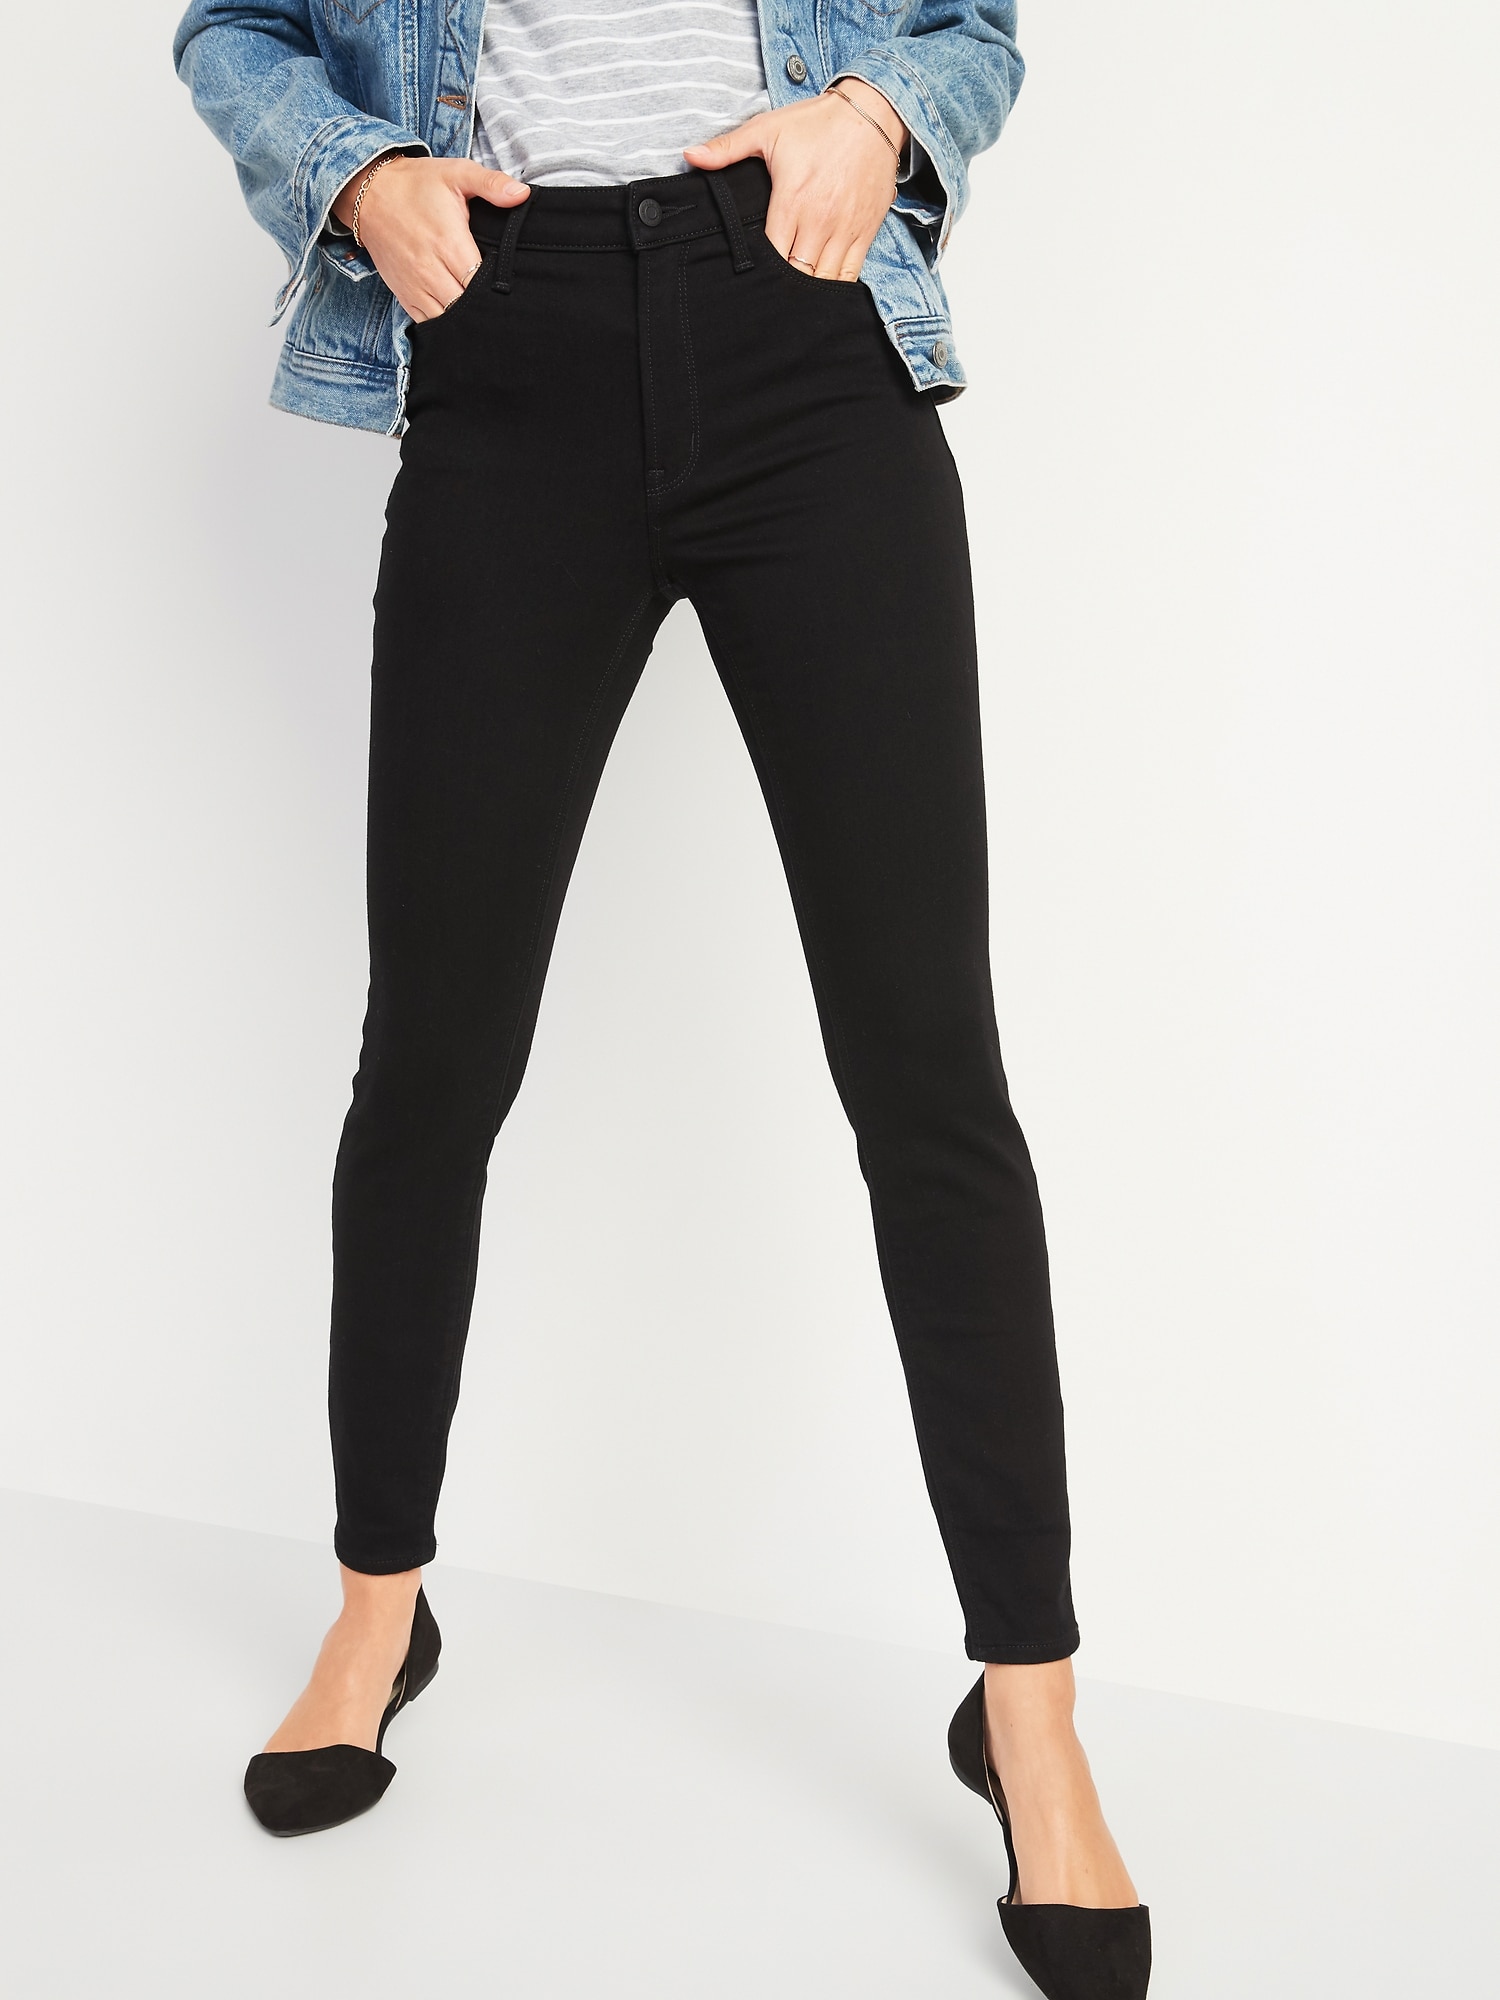 old navy high waisted black jeans